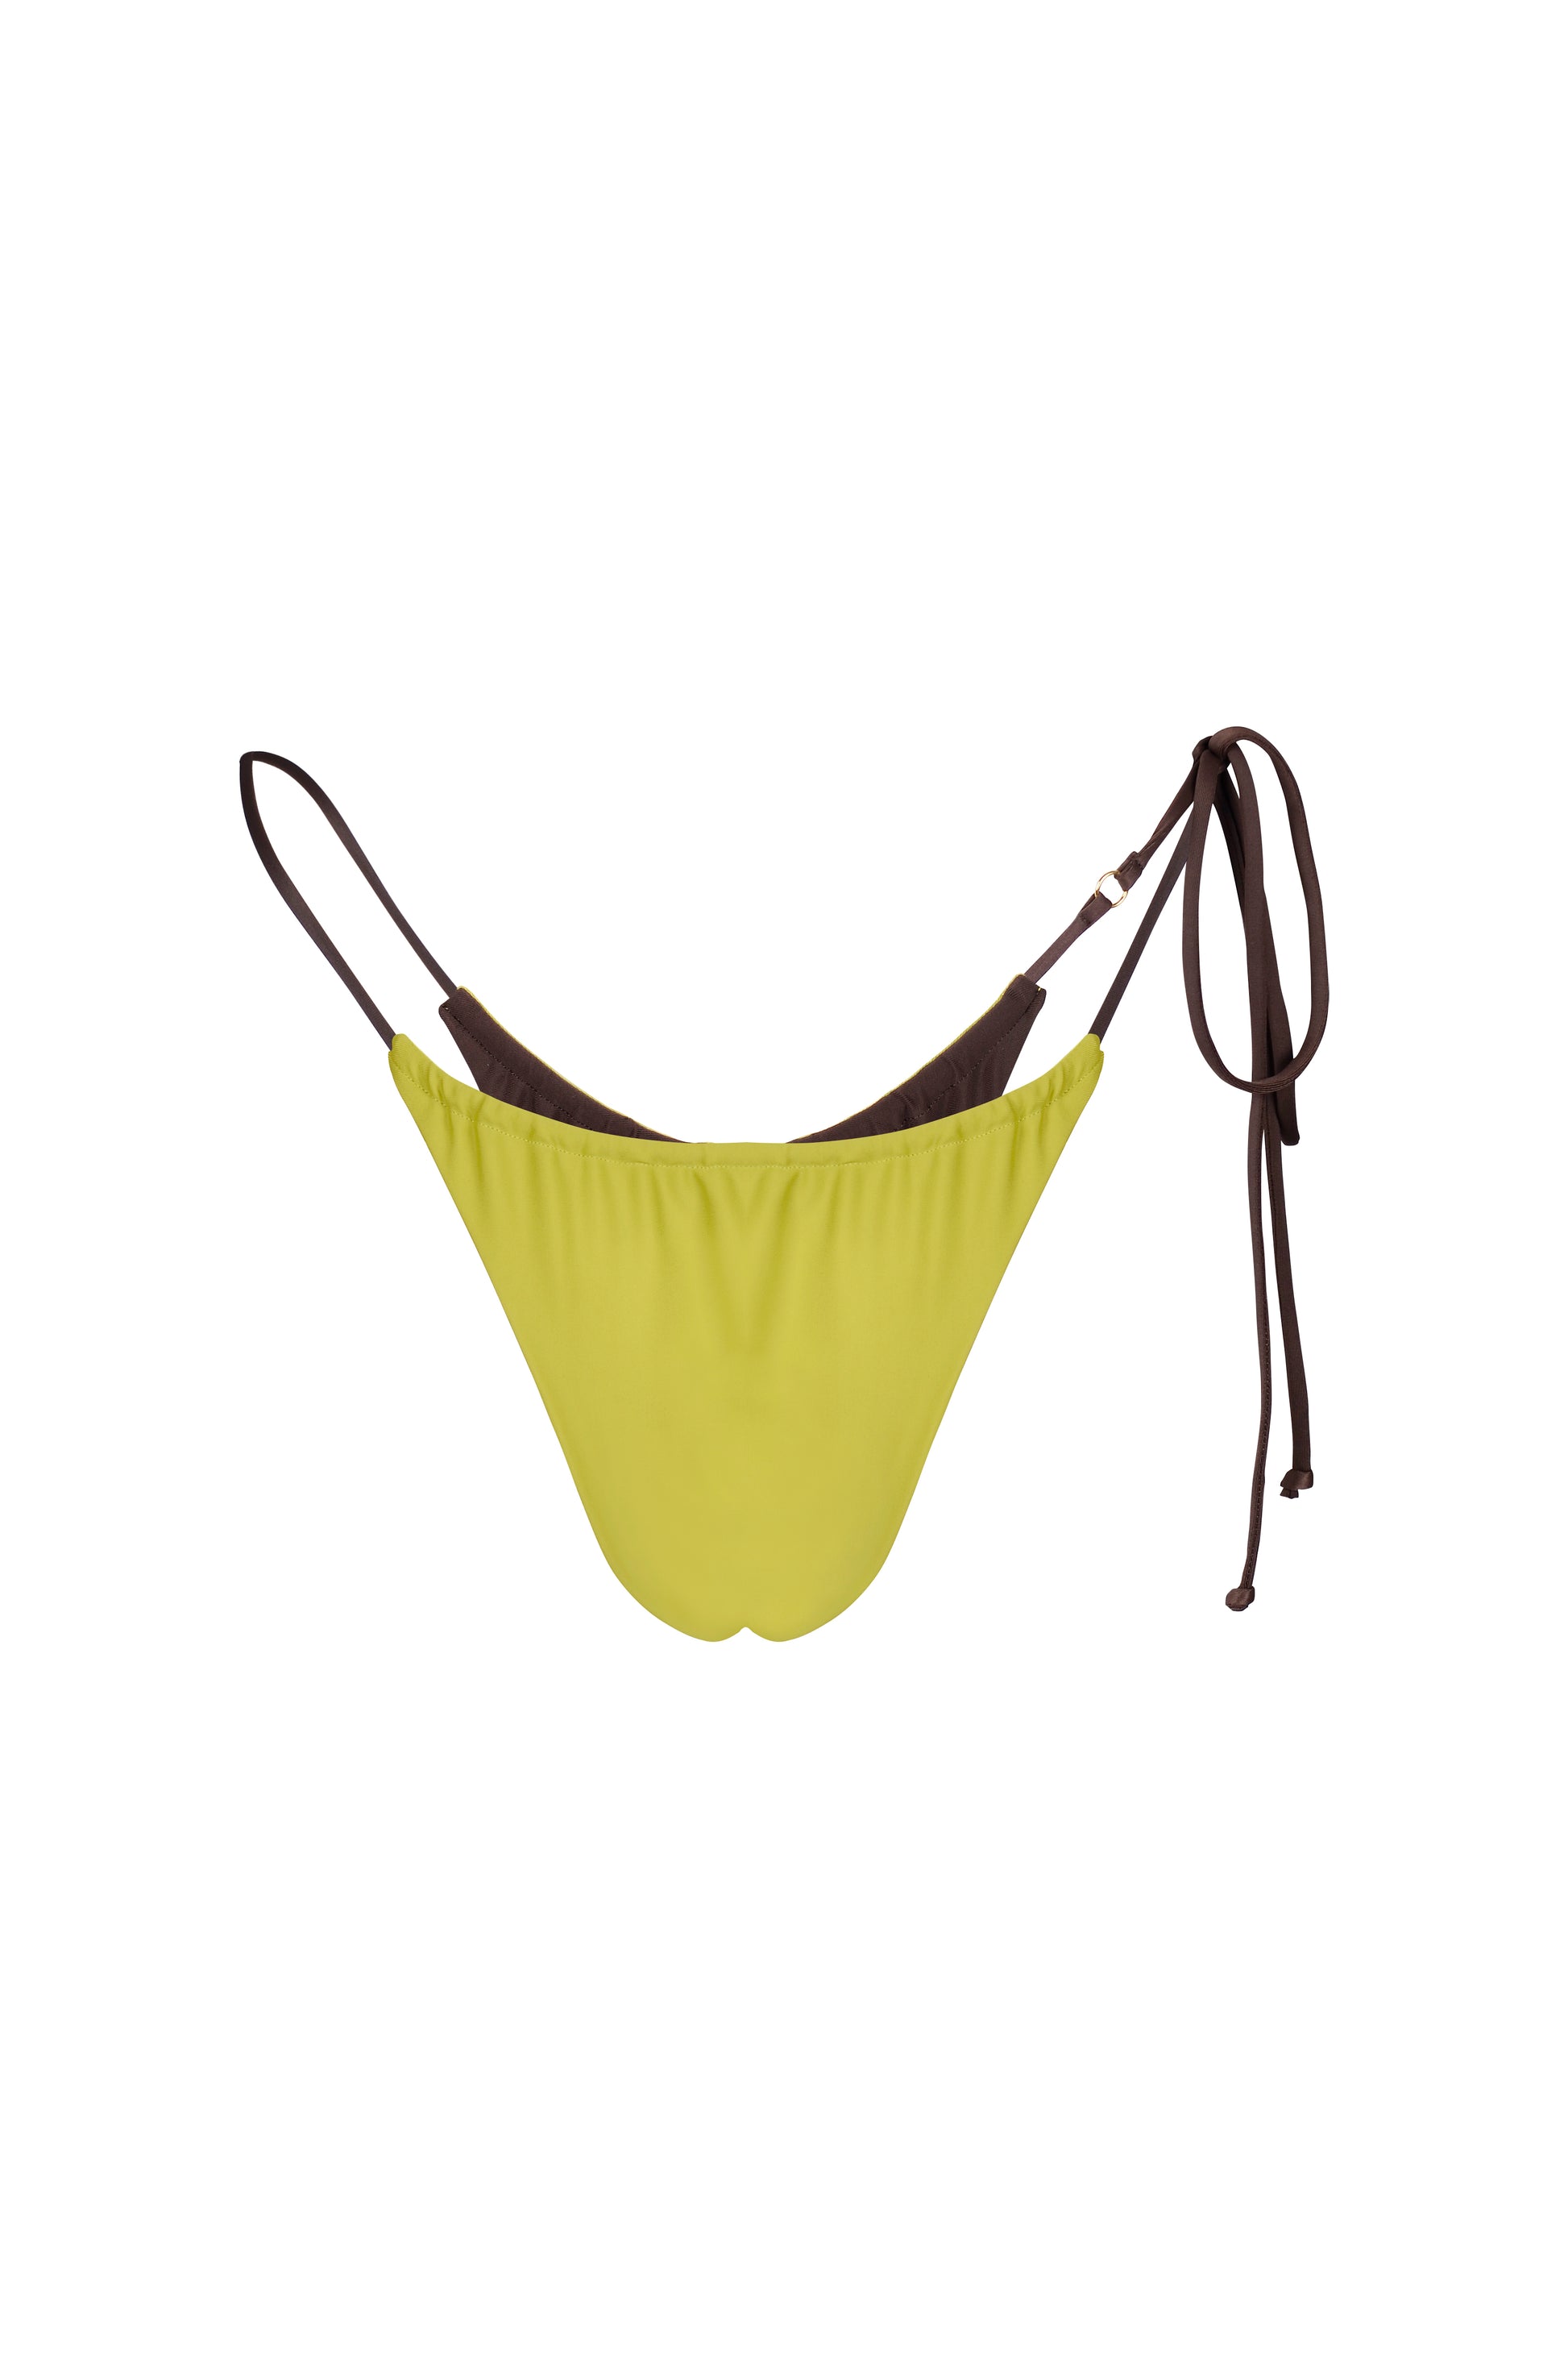 XENA TRIANGLE BOTTOM (CHOCO - LIME) - Swimwear THIS IS A LOVE SONG